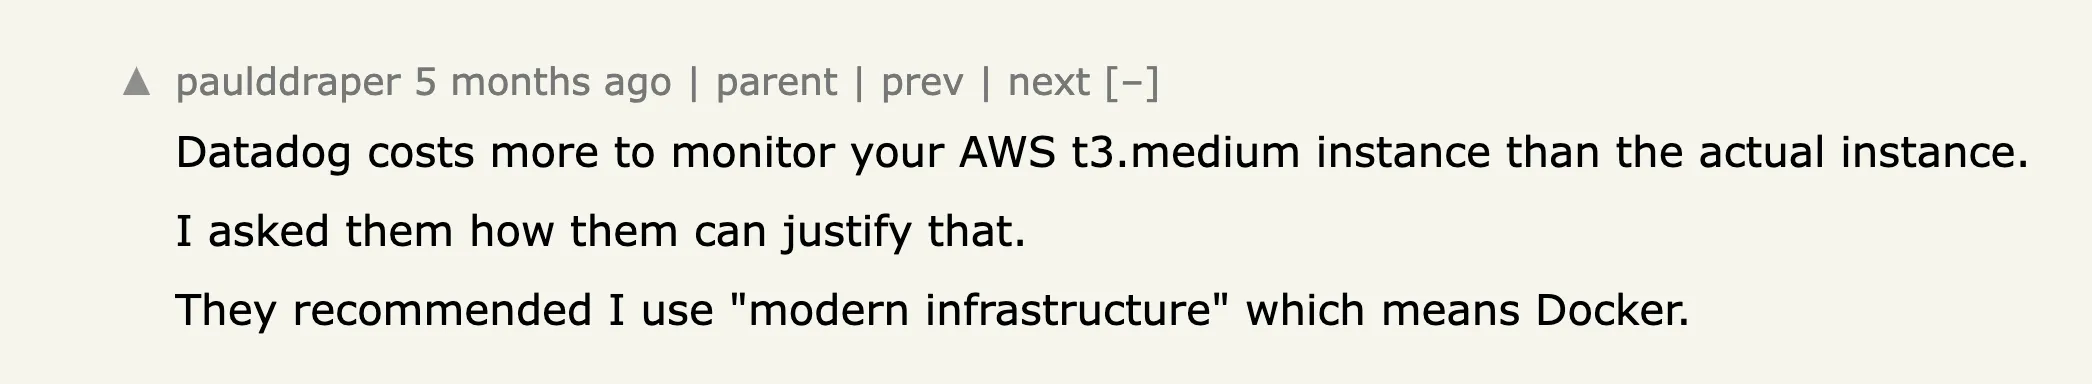 a hacker news comment reading Datadog costs more to monitor your AWS t3.medium instance than the actual instance.
I asked them how them can justify that.
They recommended I use modern infrastructure which means Docker.